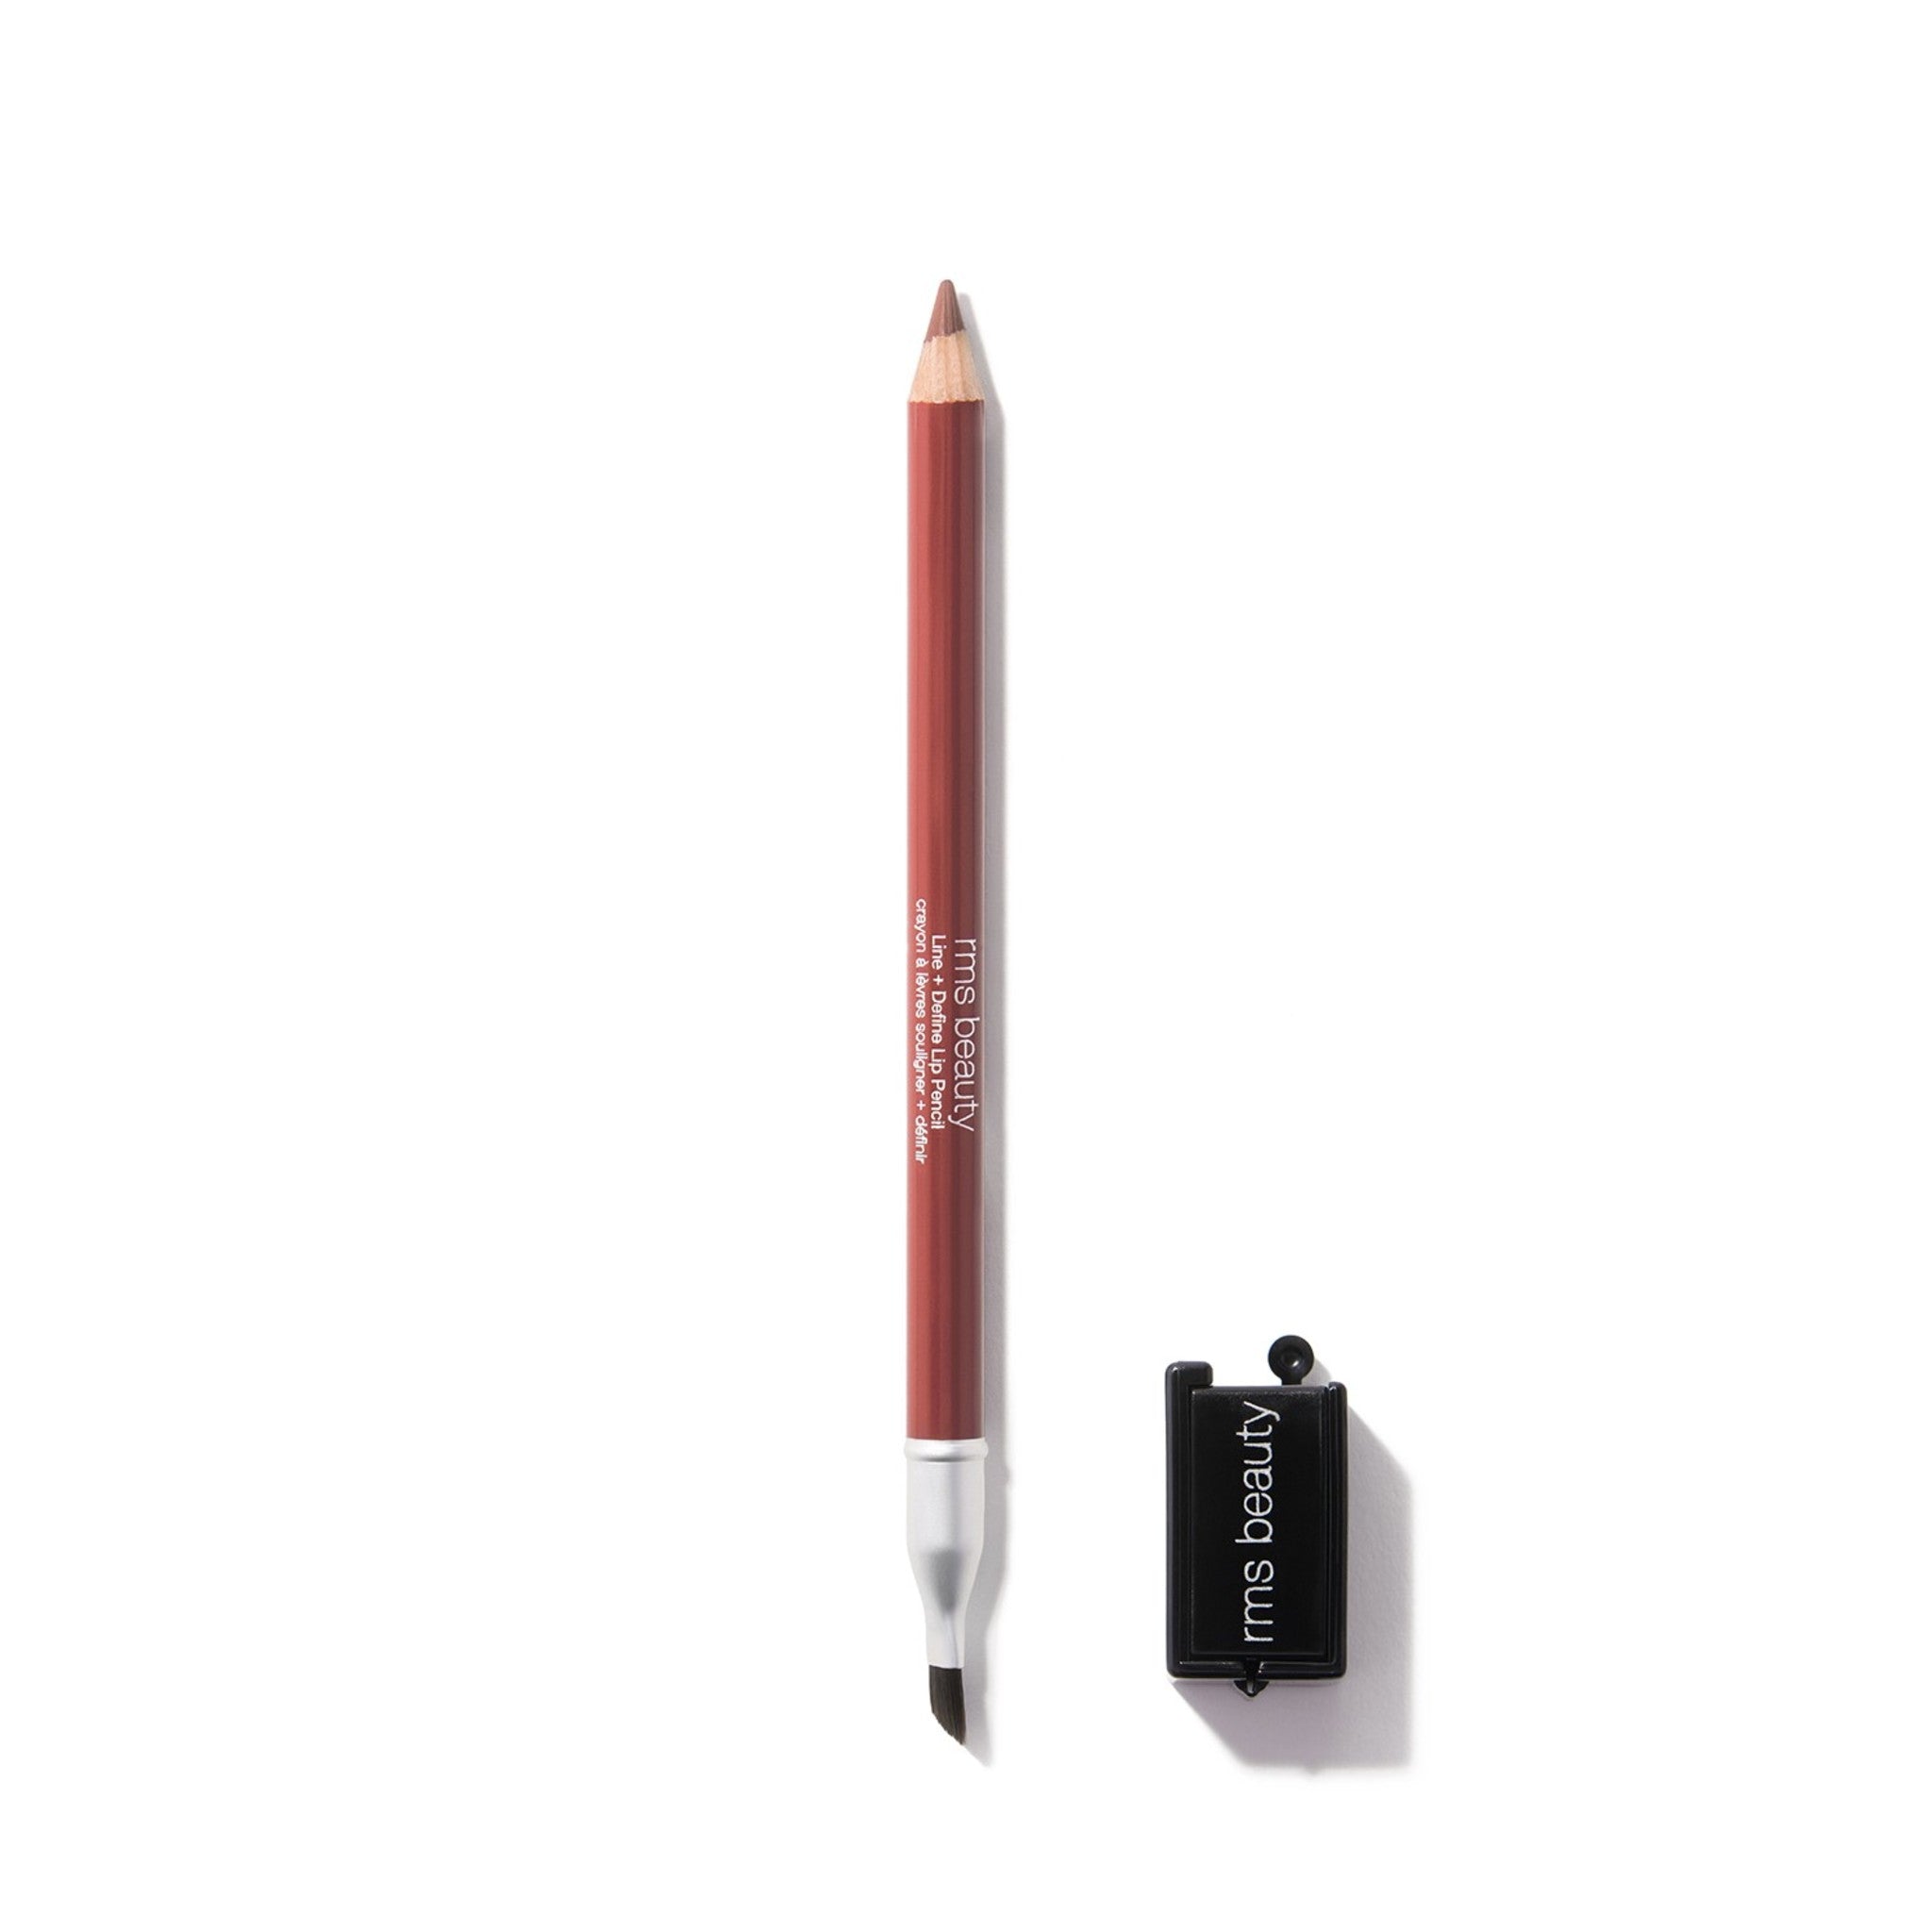 RMS Beauty Go Nude Lip Pencil Color/Shade variant: Nighttime Nude main image. This product is in the color nude